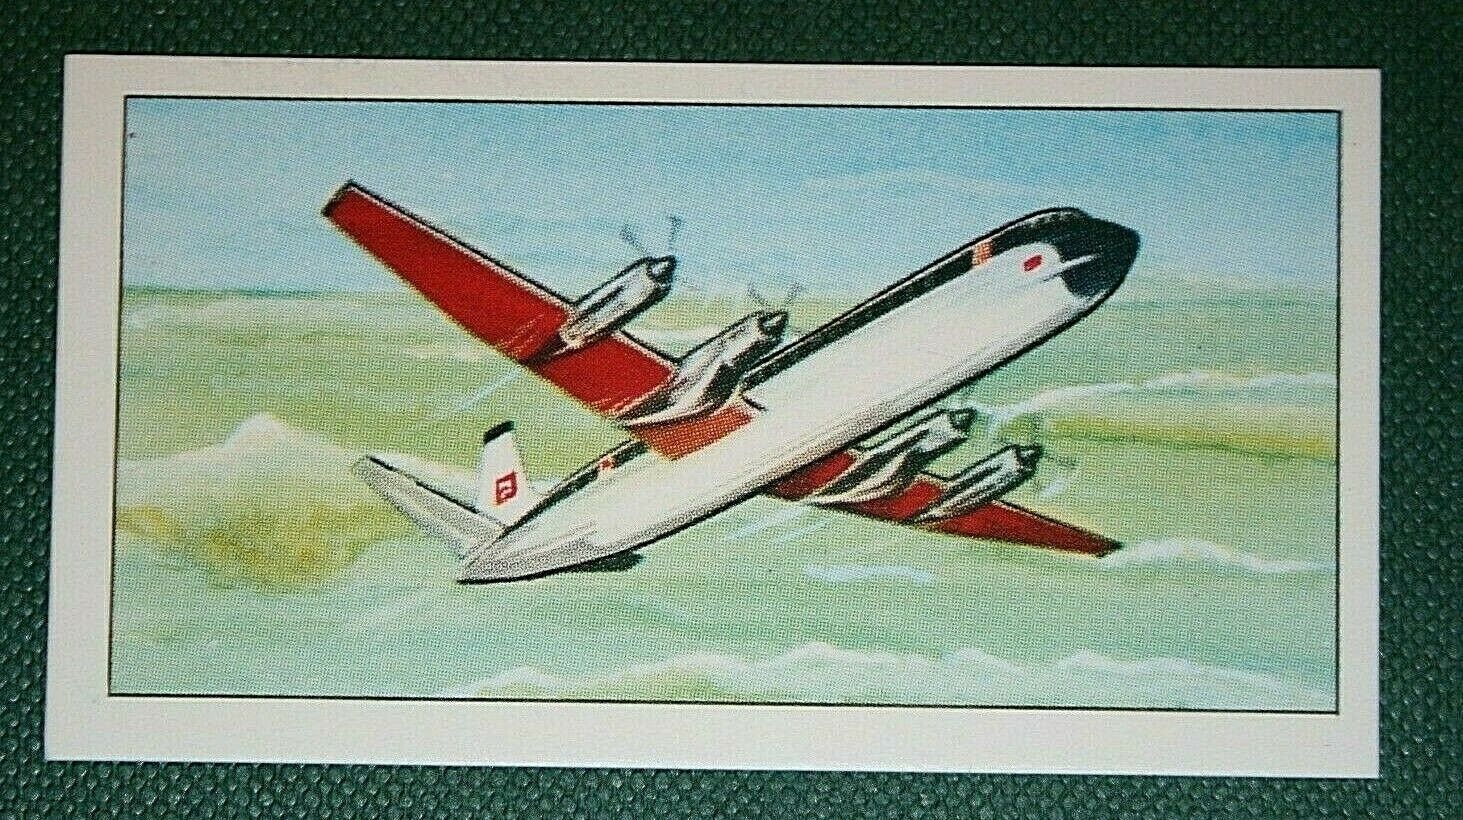 VANGUARD 951   Vickers Armstrong Airliner   Illustrated Card  WC20